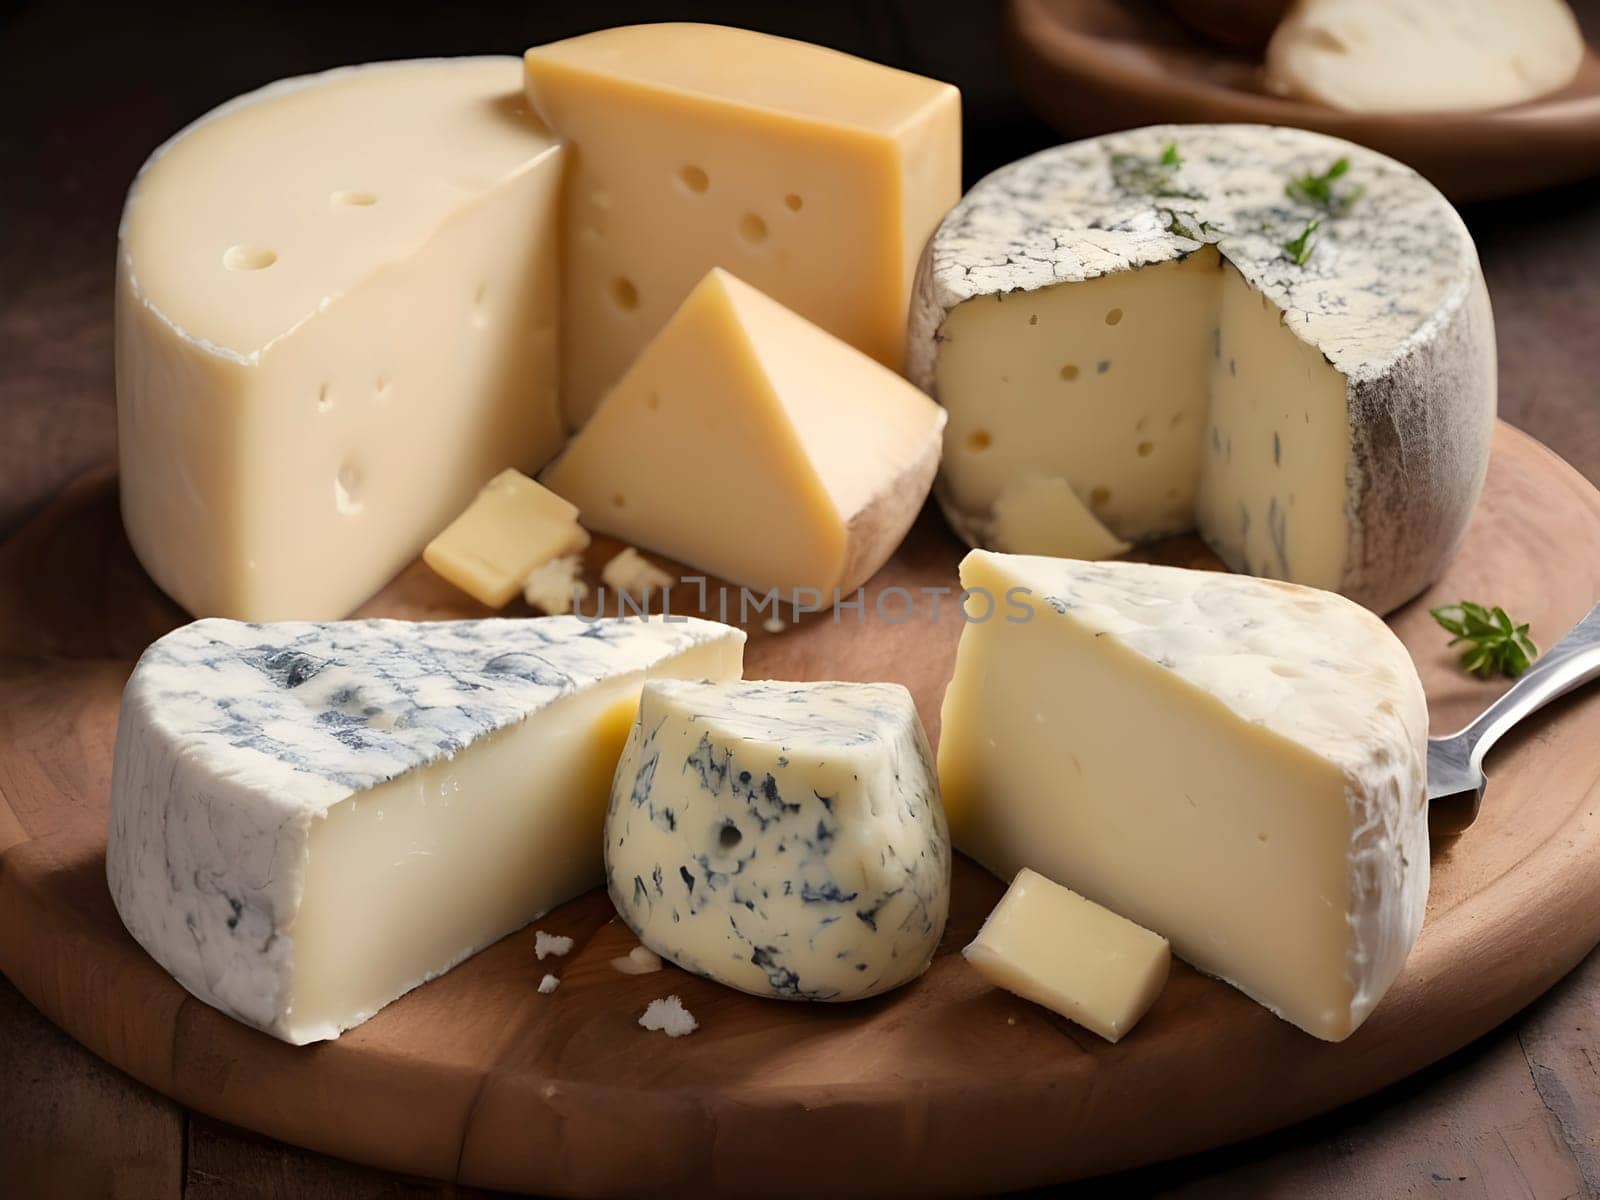 Fromage Fusion: A Blend of Irresistible Cheeses to Delight the Palate by mailos